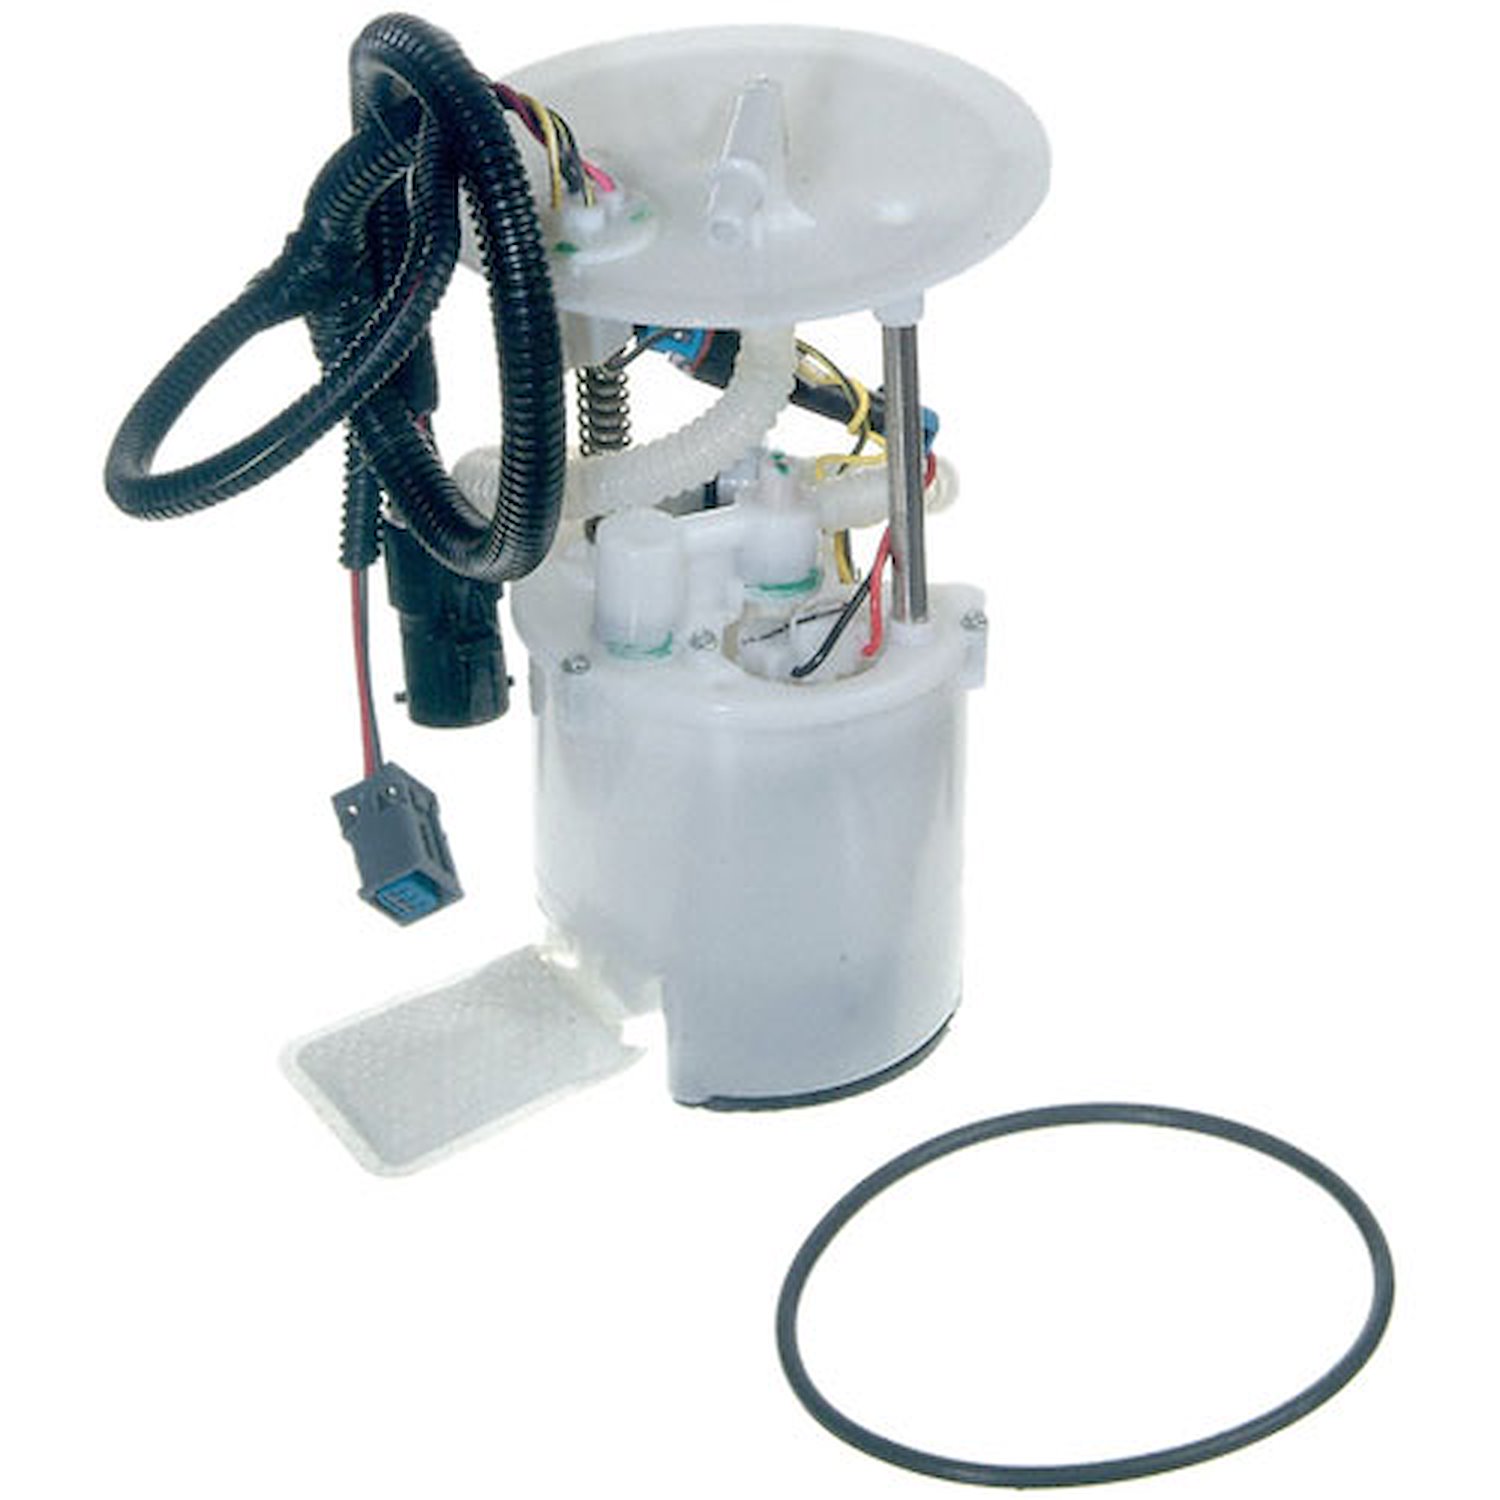 OE Ford Replacement Electric Fuel Pump Module Assembly 2002-06 Ford Taurus 3.0L V6